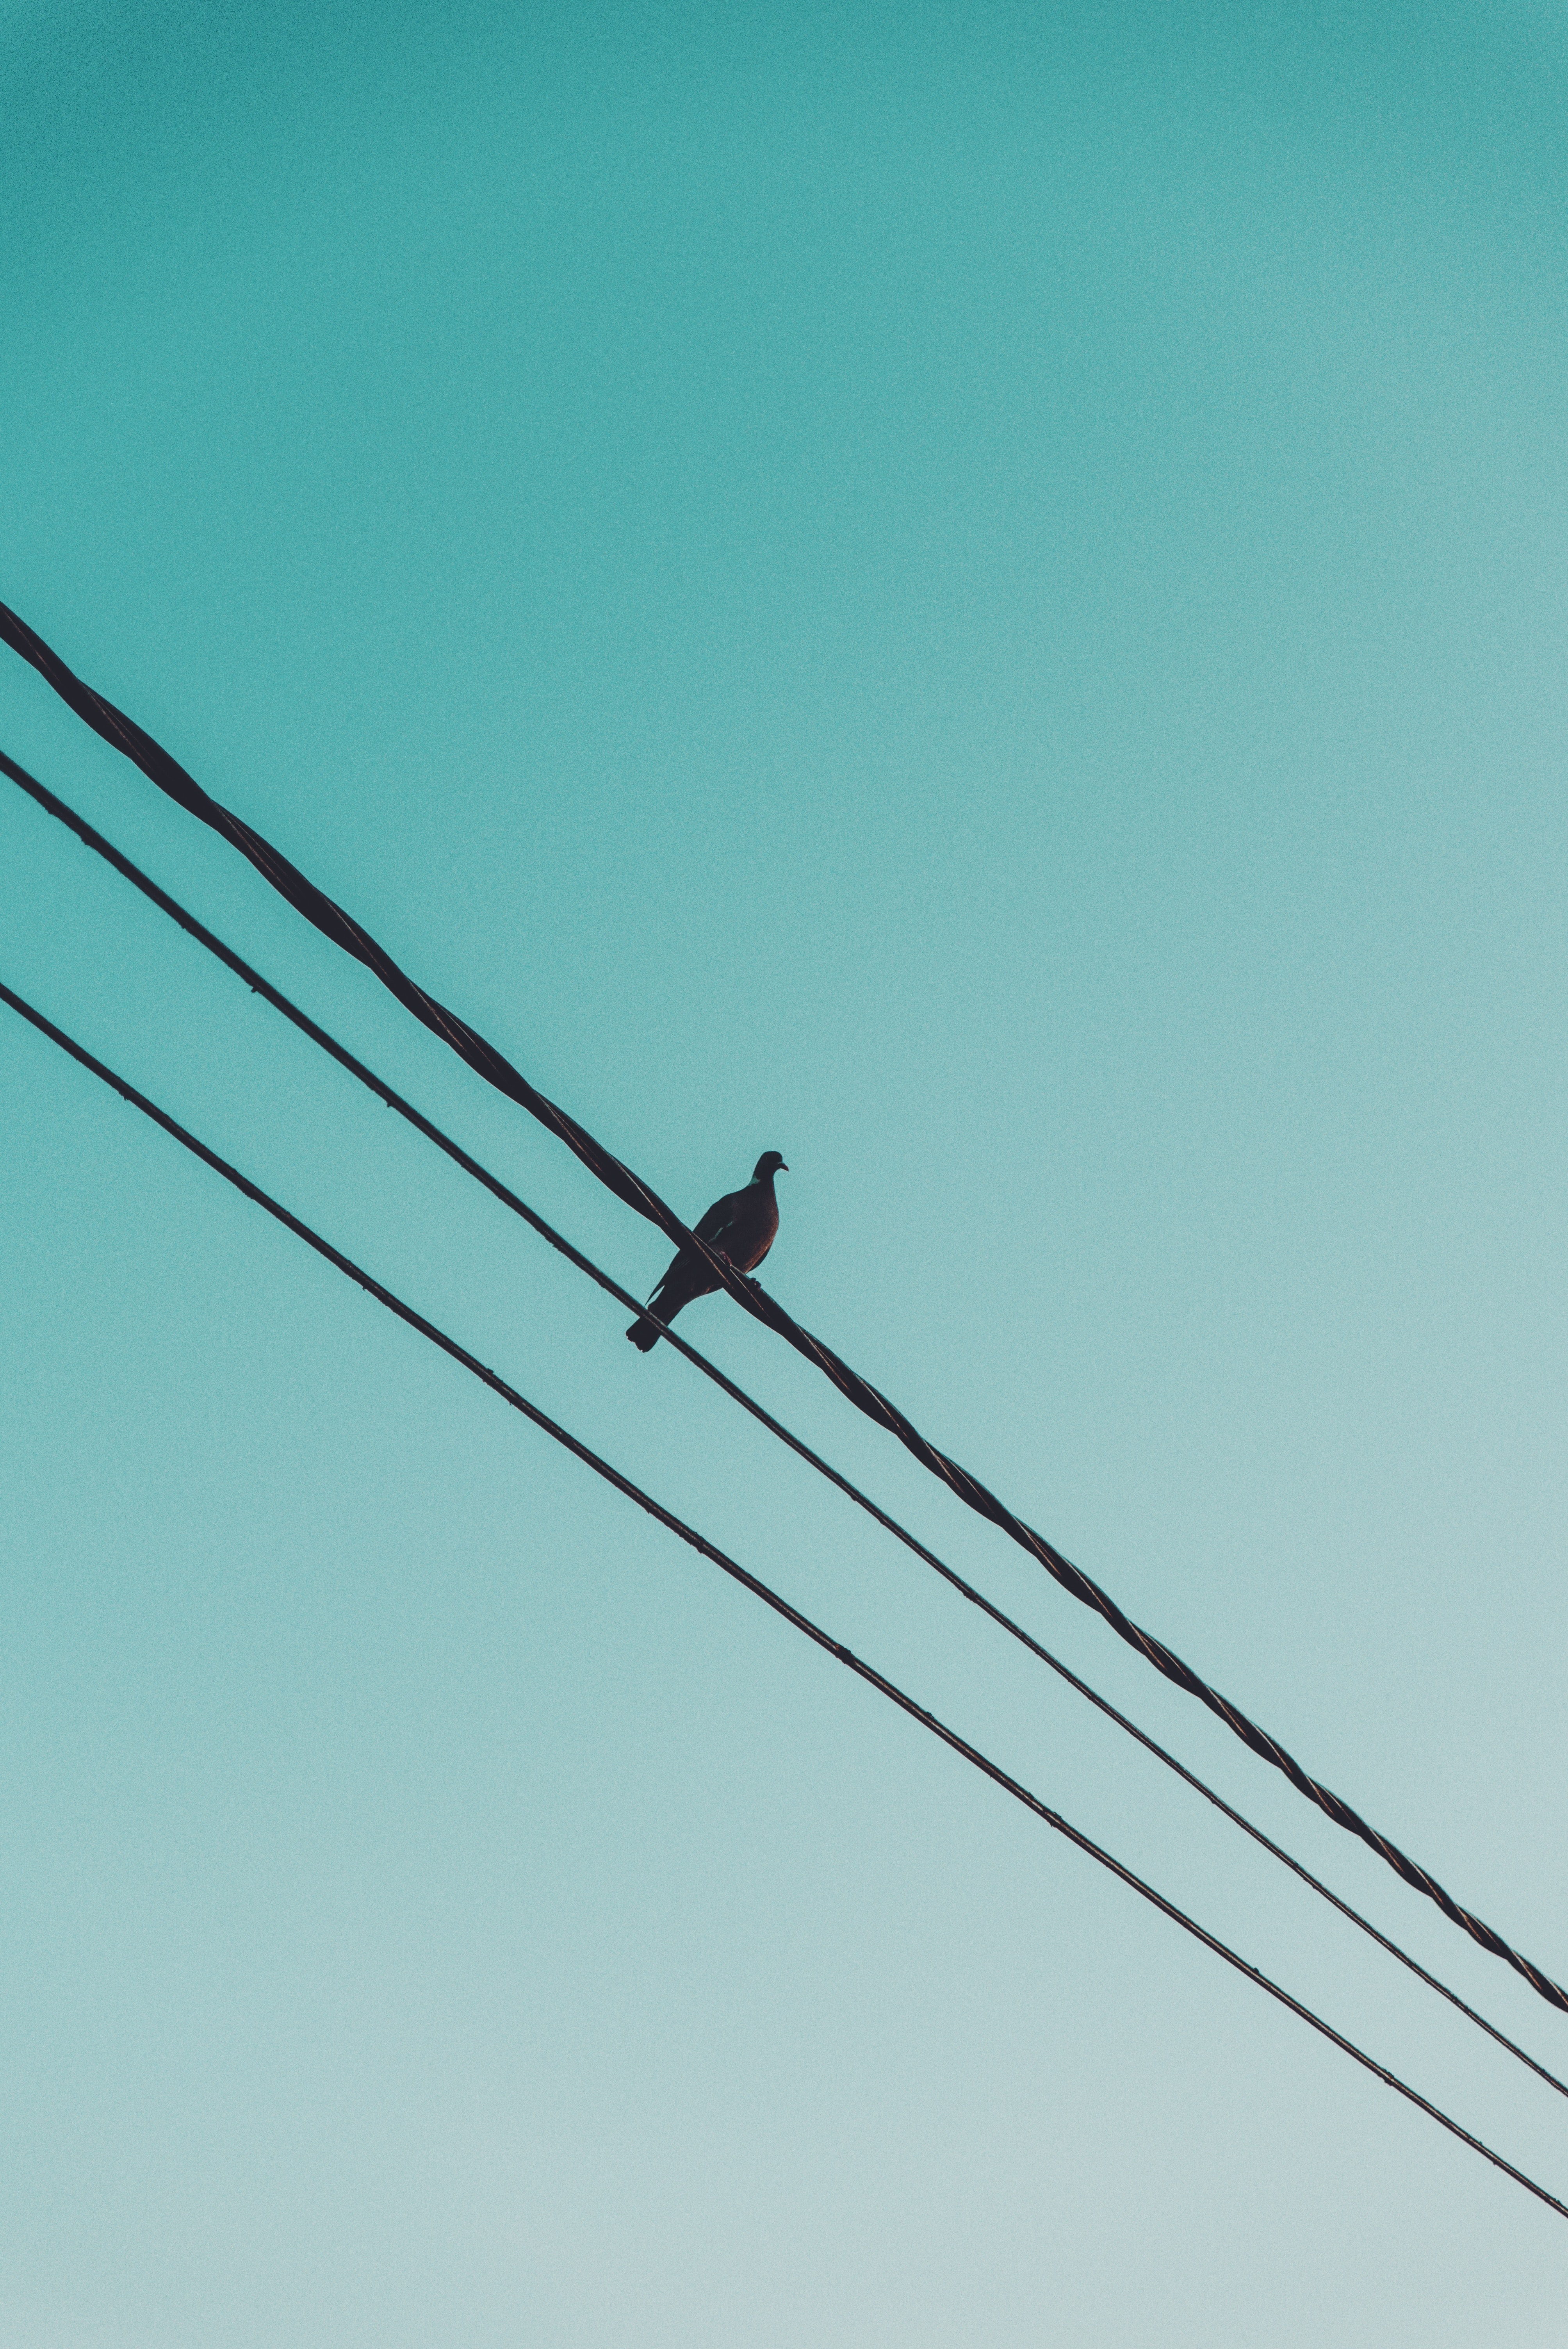 wires, dove, animals, sky, wire phone background